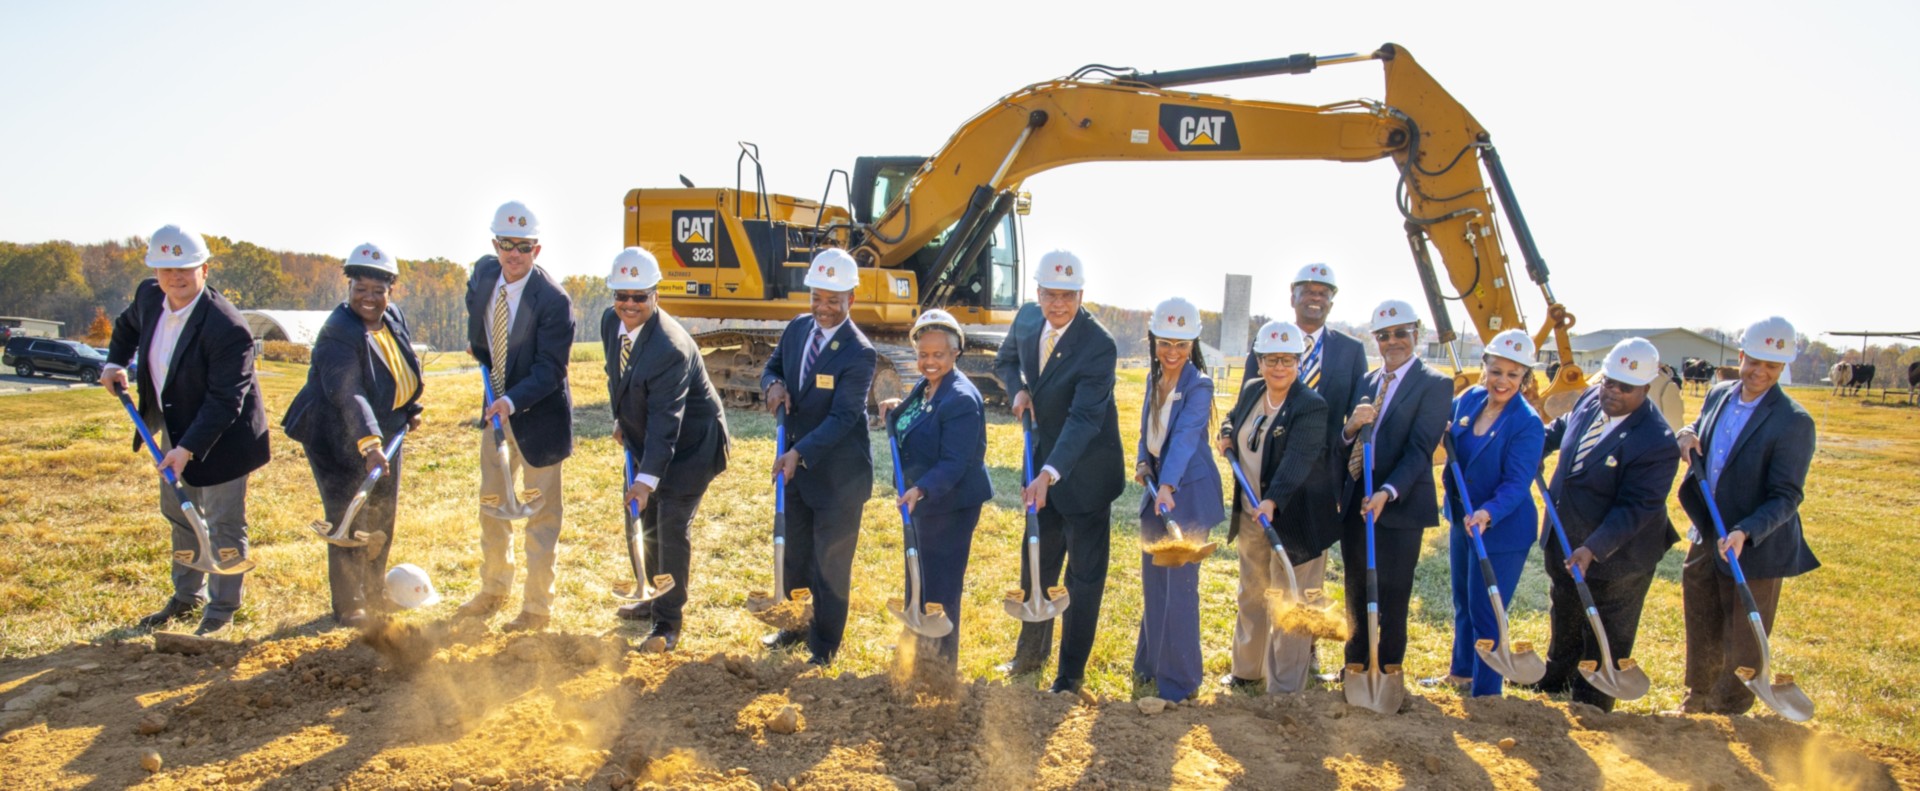 A group of people in suits and hard hats standing in front of a pile of dirt